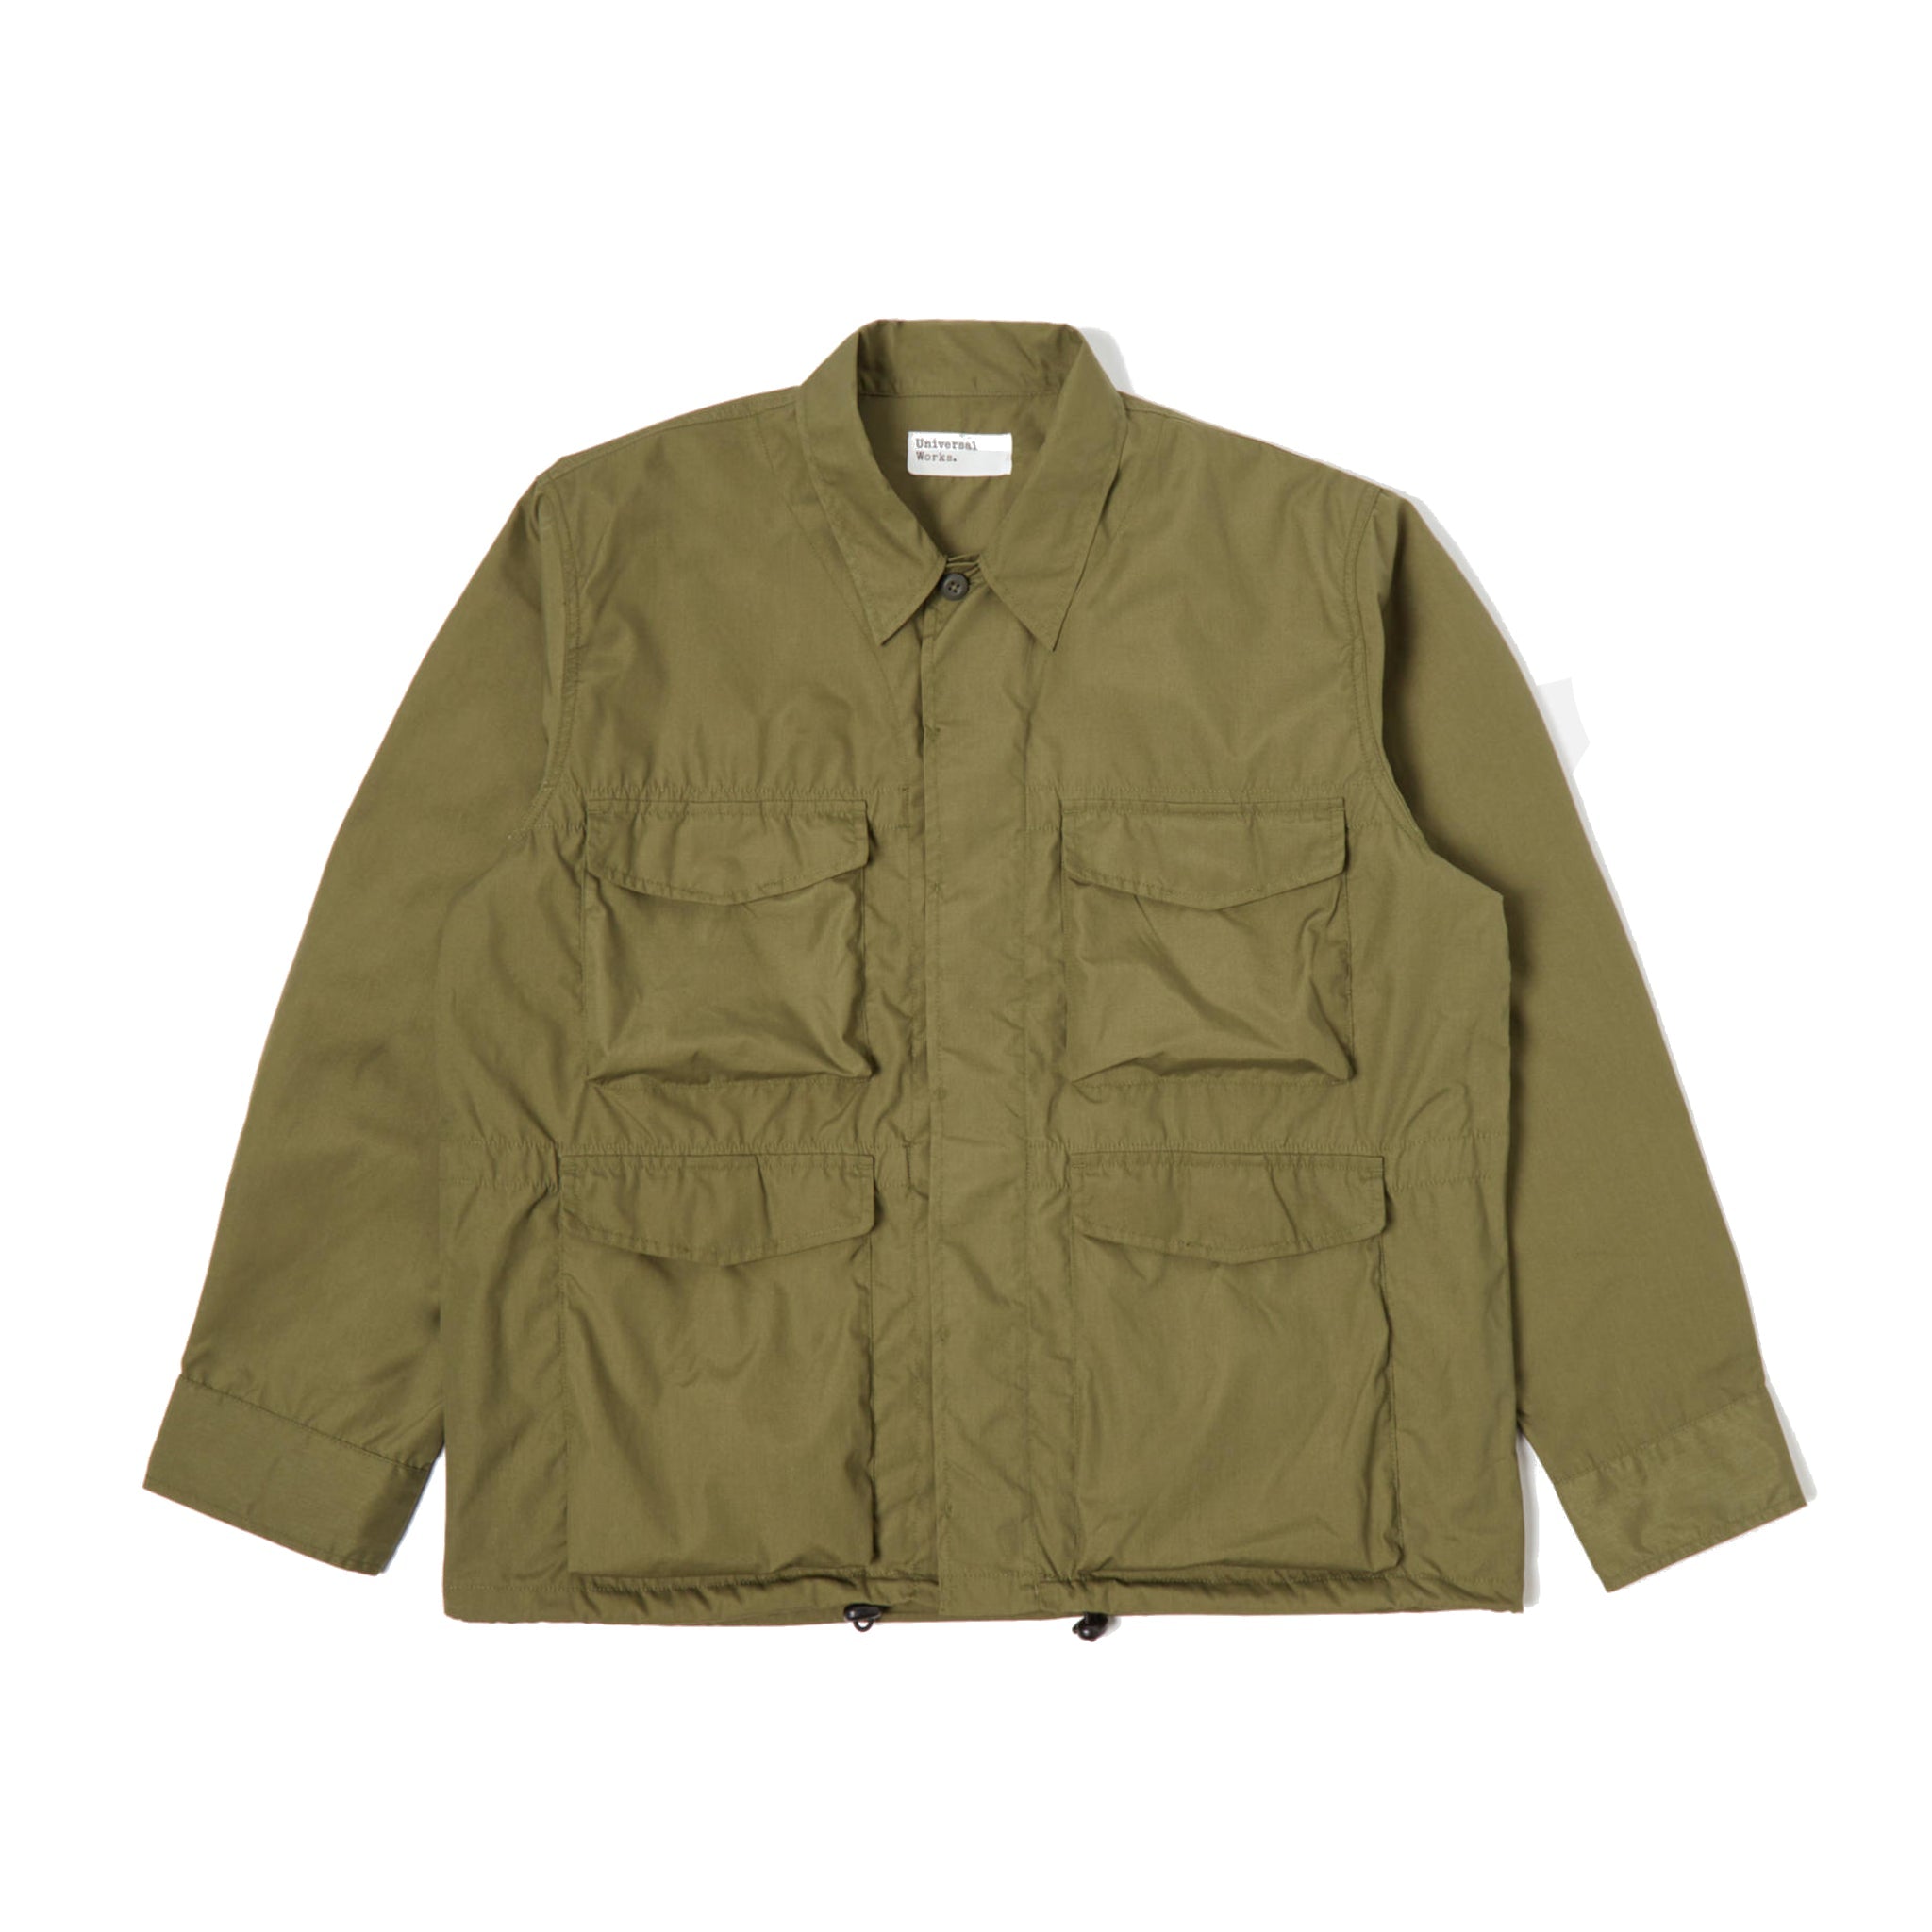 Parachute Field Jacket Recycled Poly Tech - Olive-Universal Works-W2 Store